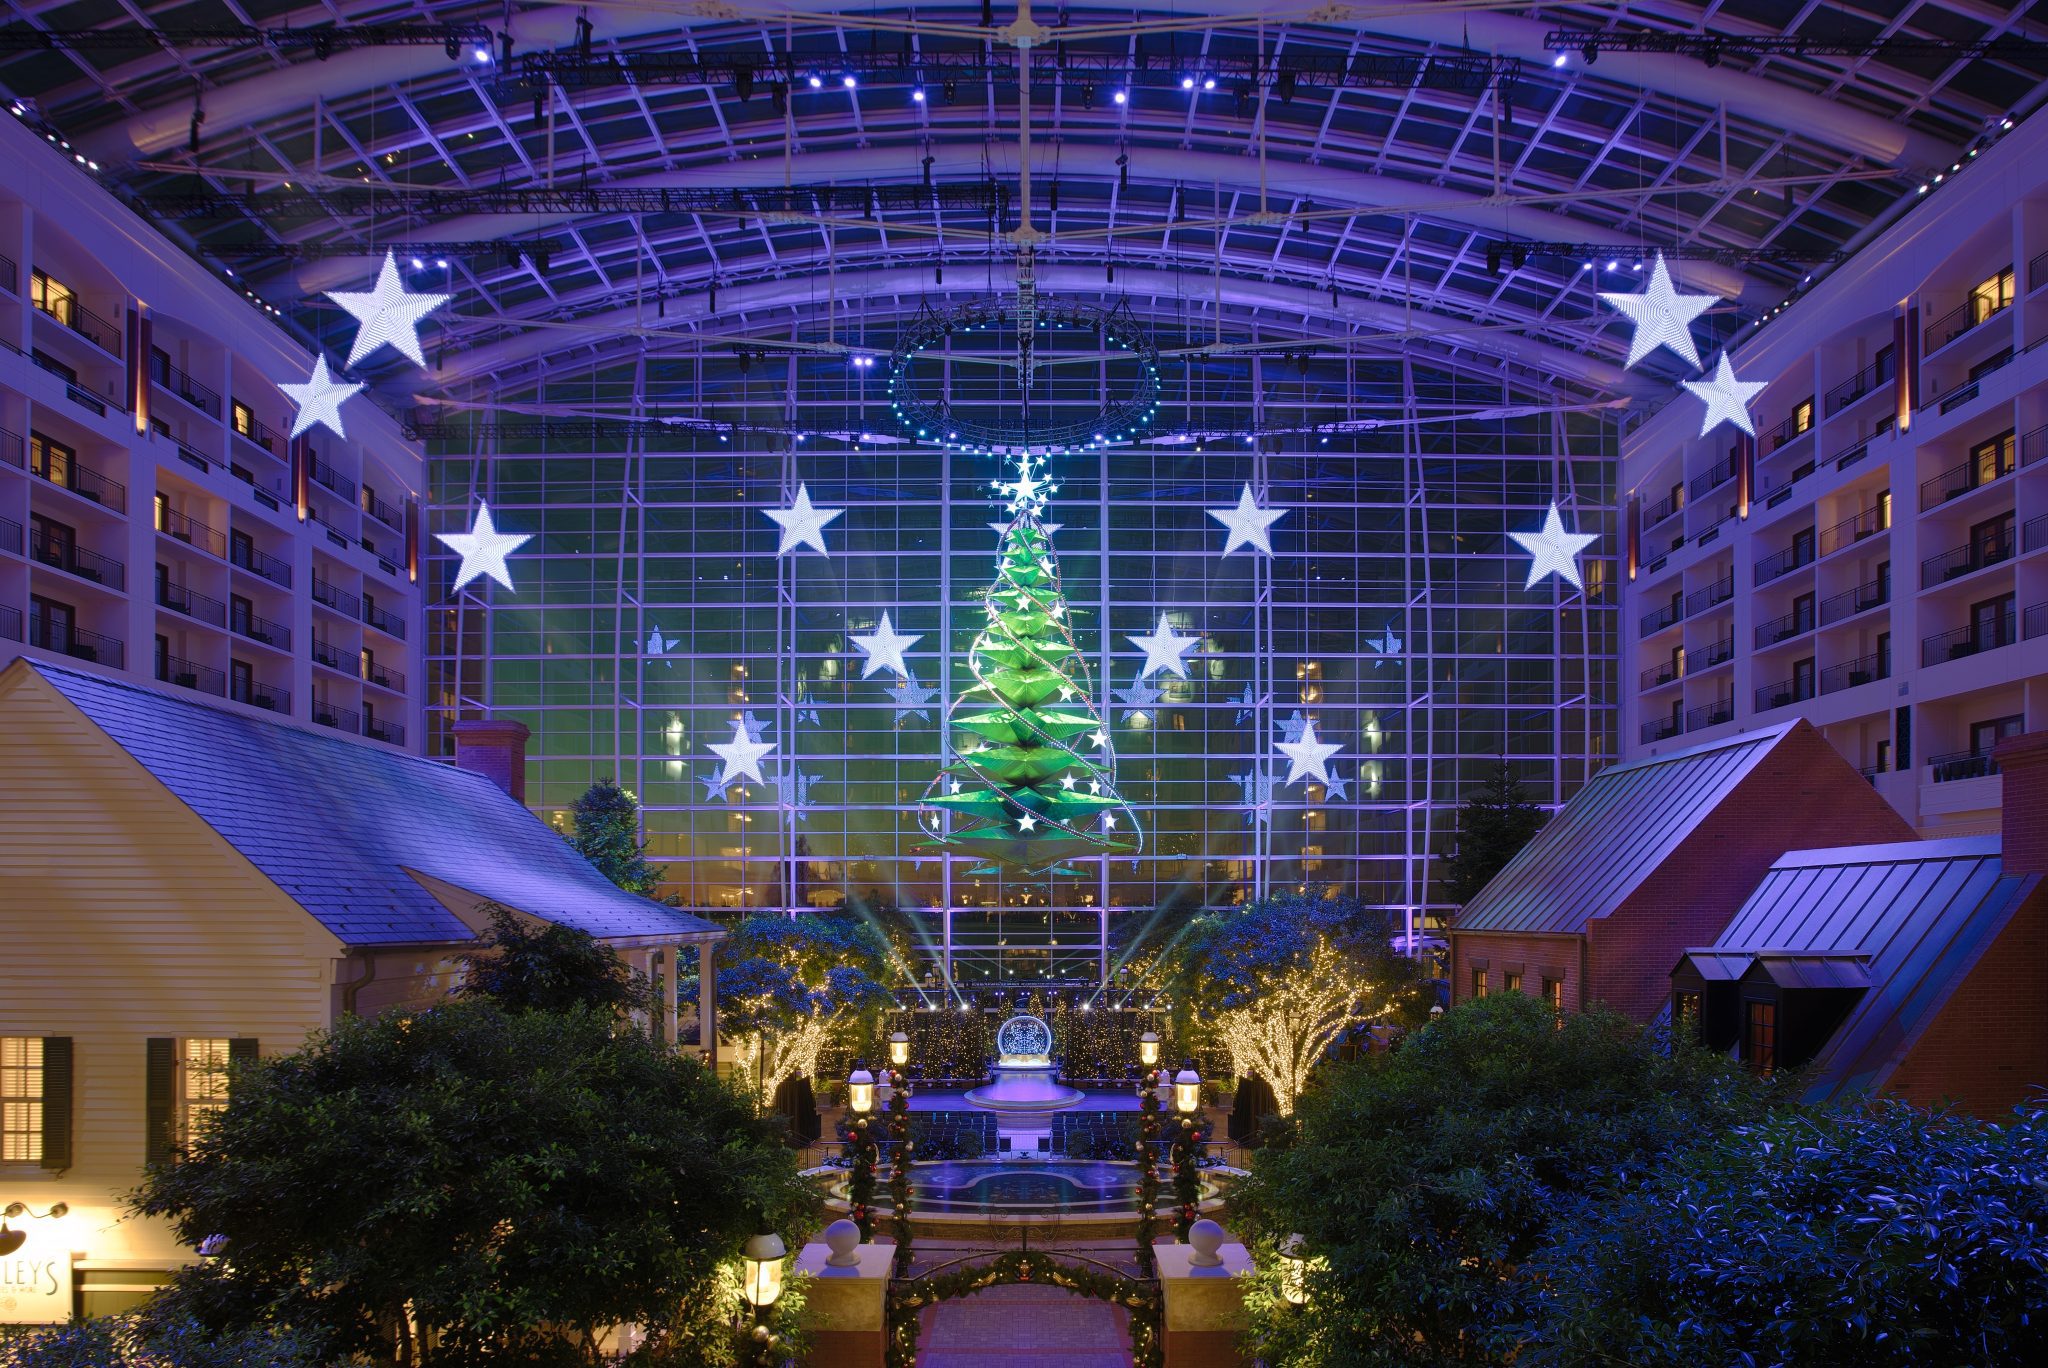 Quick & Easy Guide To Christmas At Gaylord National Harbor